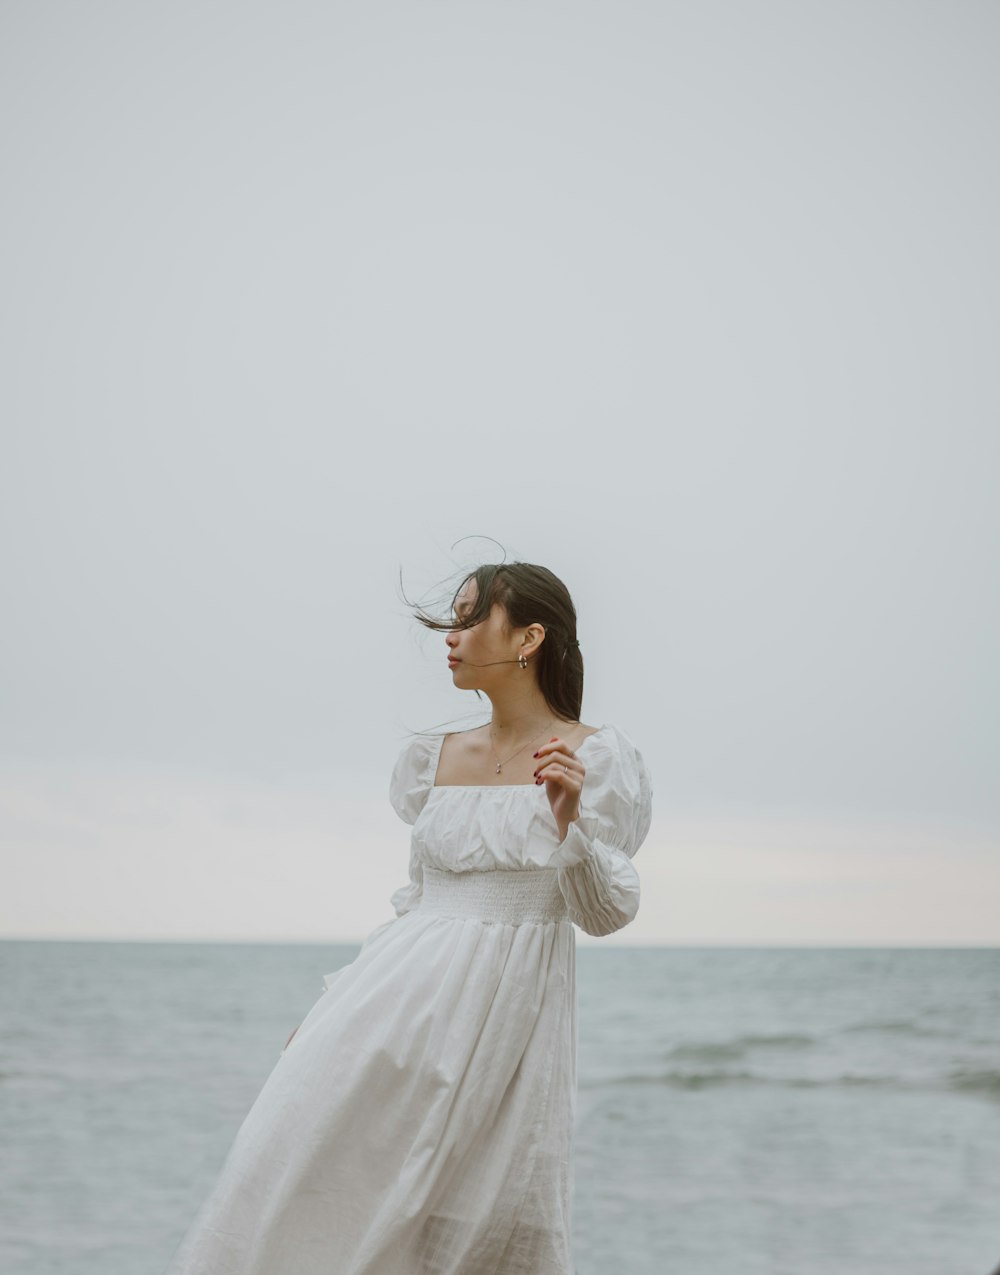 woman in white long sleeve dress standing on seashore during daytime